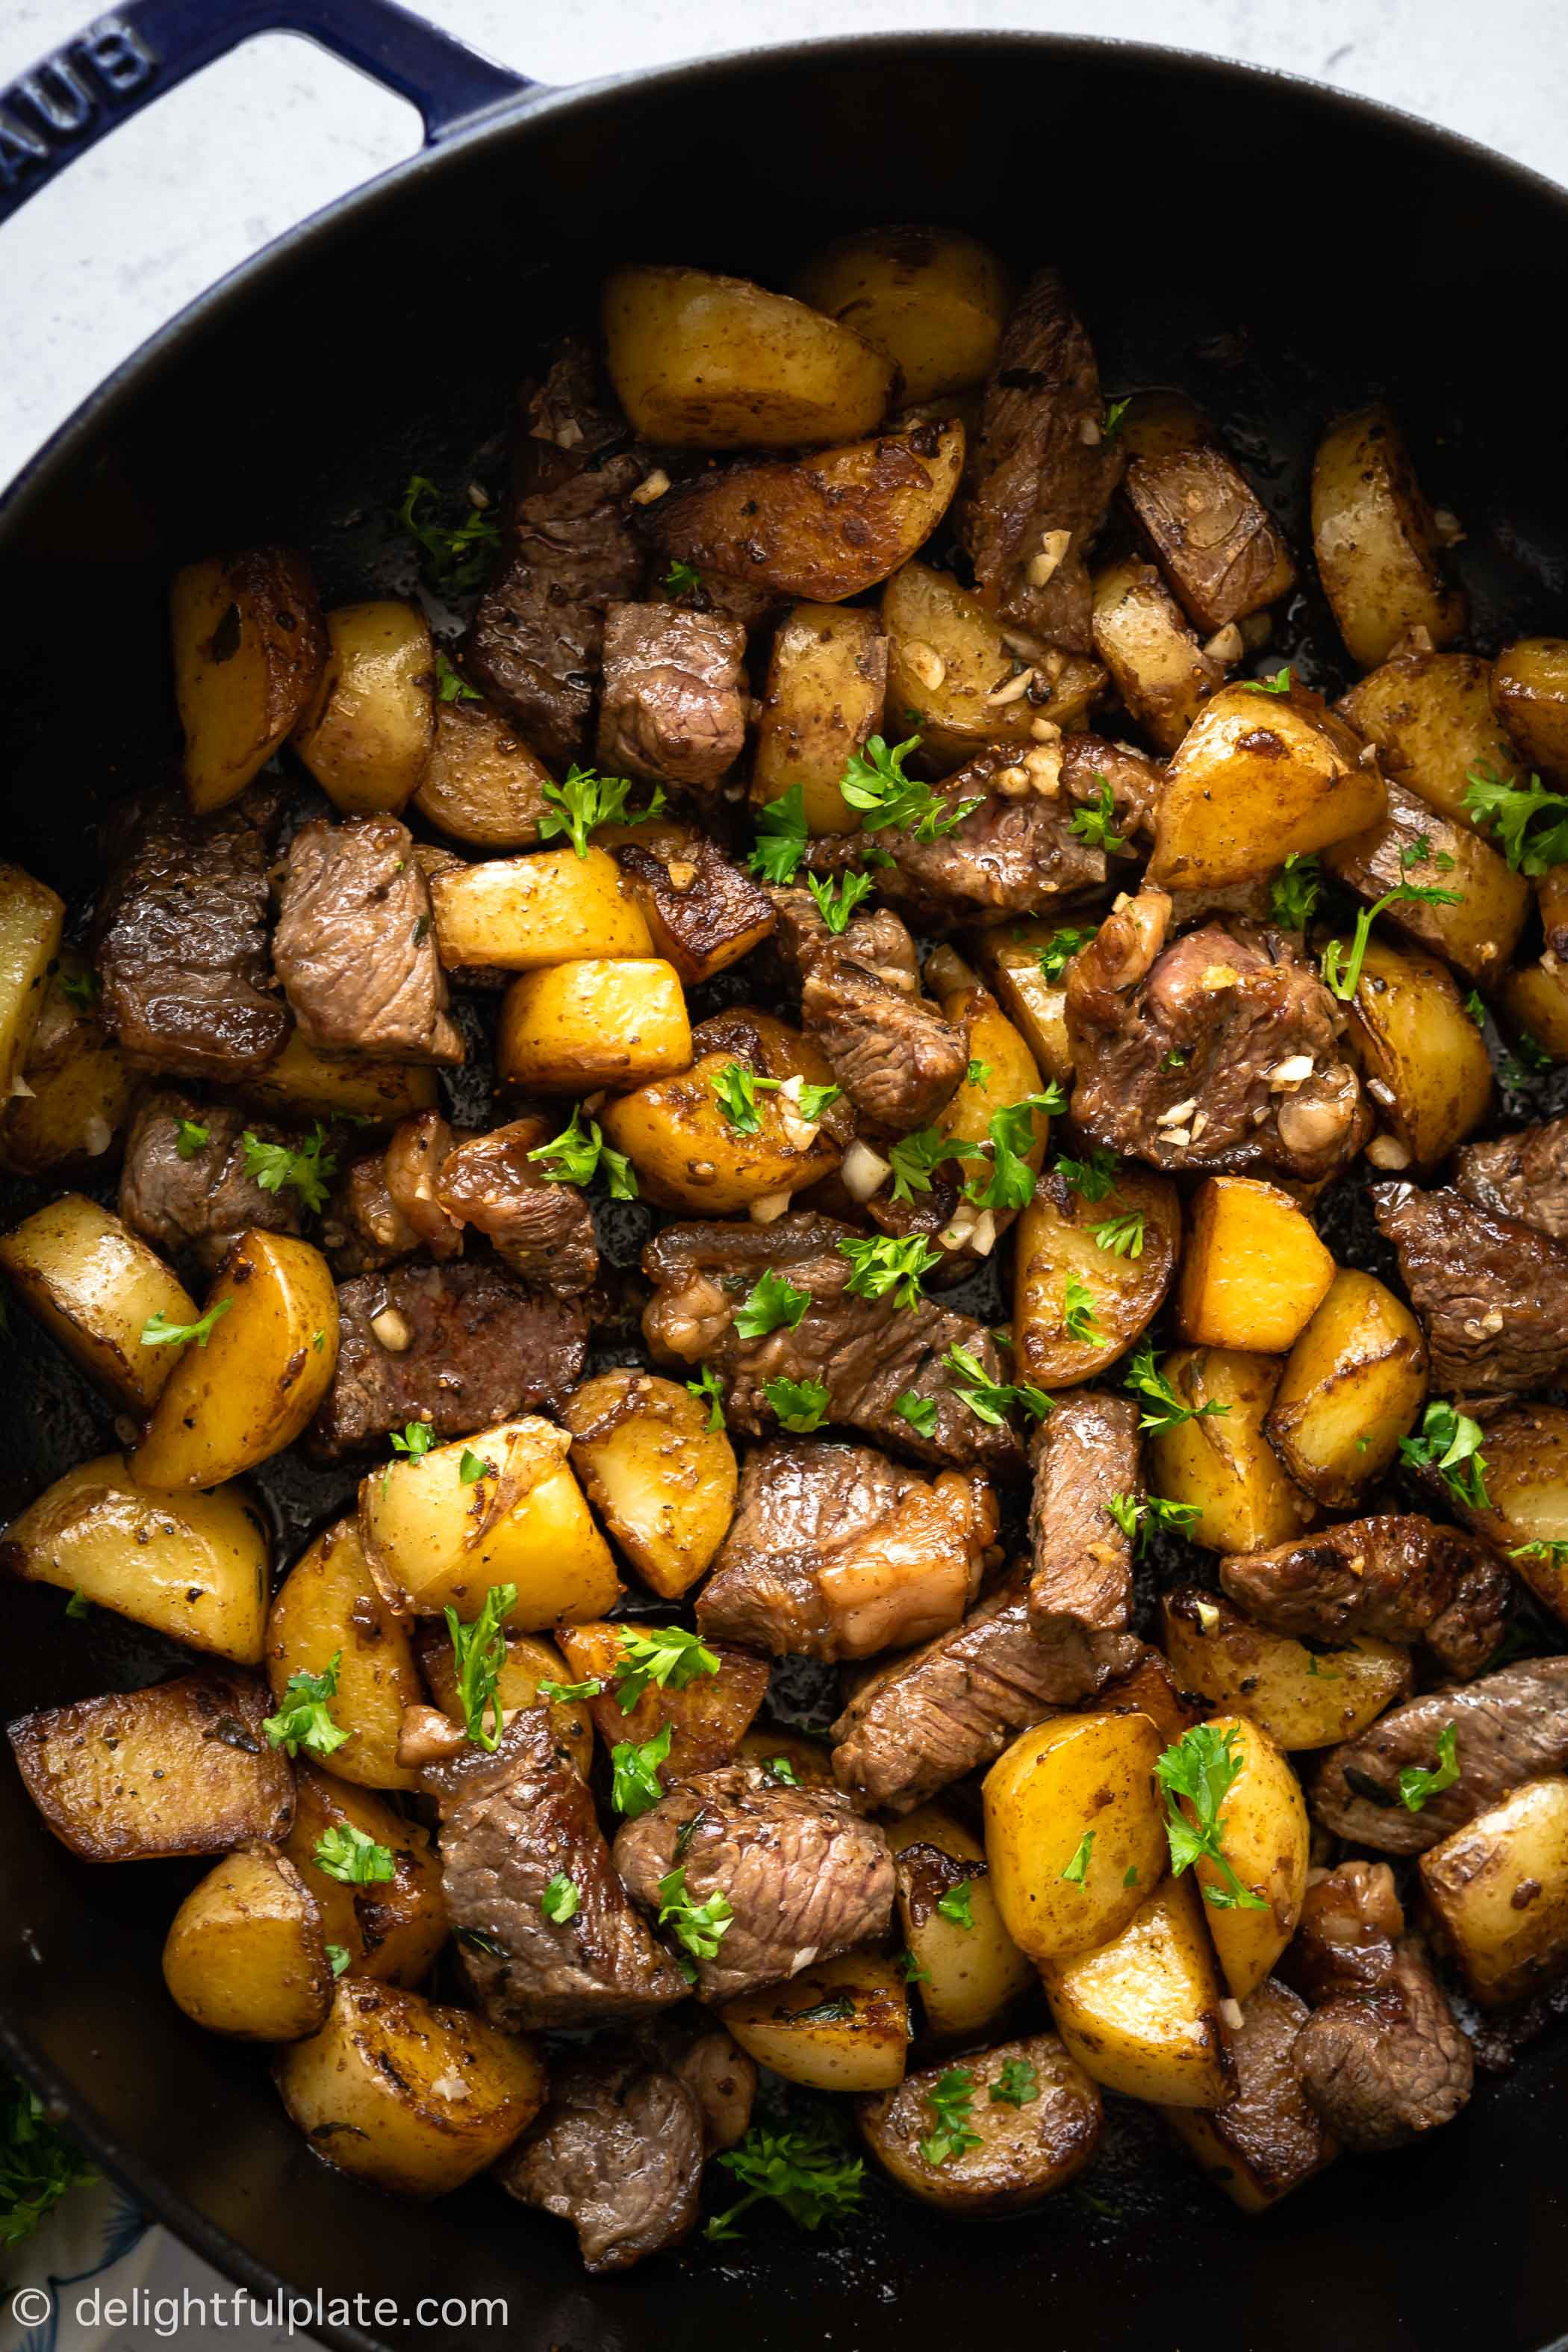 This Butter Soy Steak Bites and Potatoes recipe features seared beef cubes and potatoes in a garlicky butter and soy-based sauce. It comes together in under 30 minutes and everything is cooked in just one pan. Easy weeknight dinner!